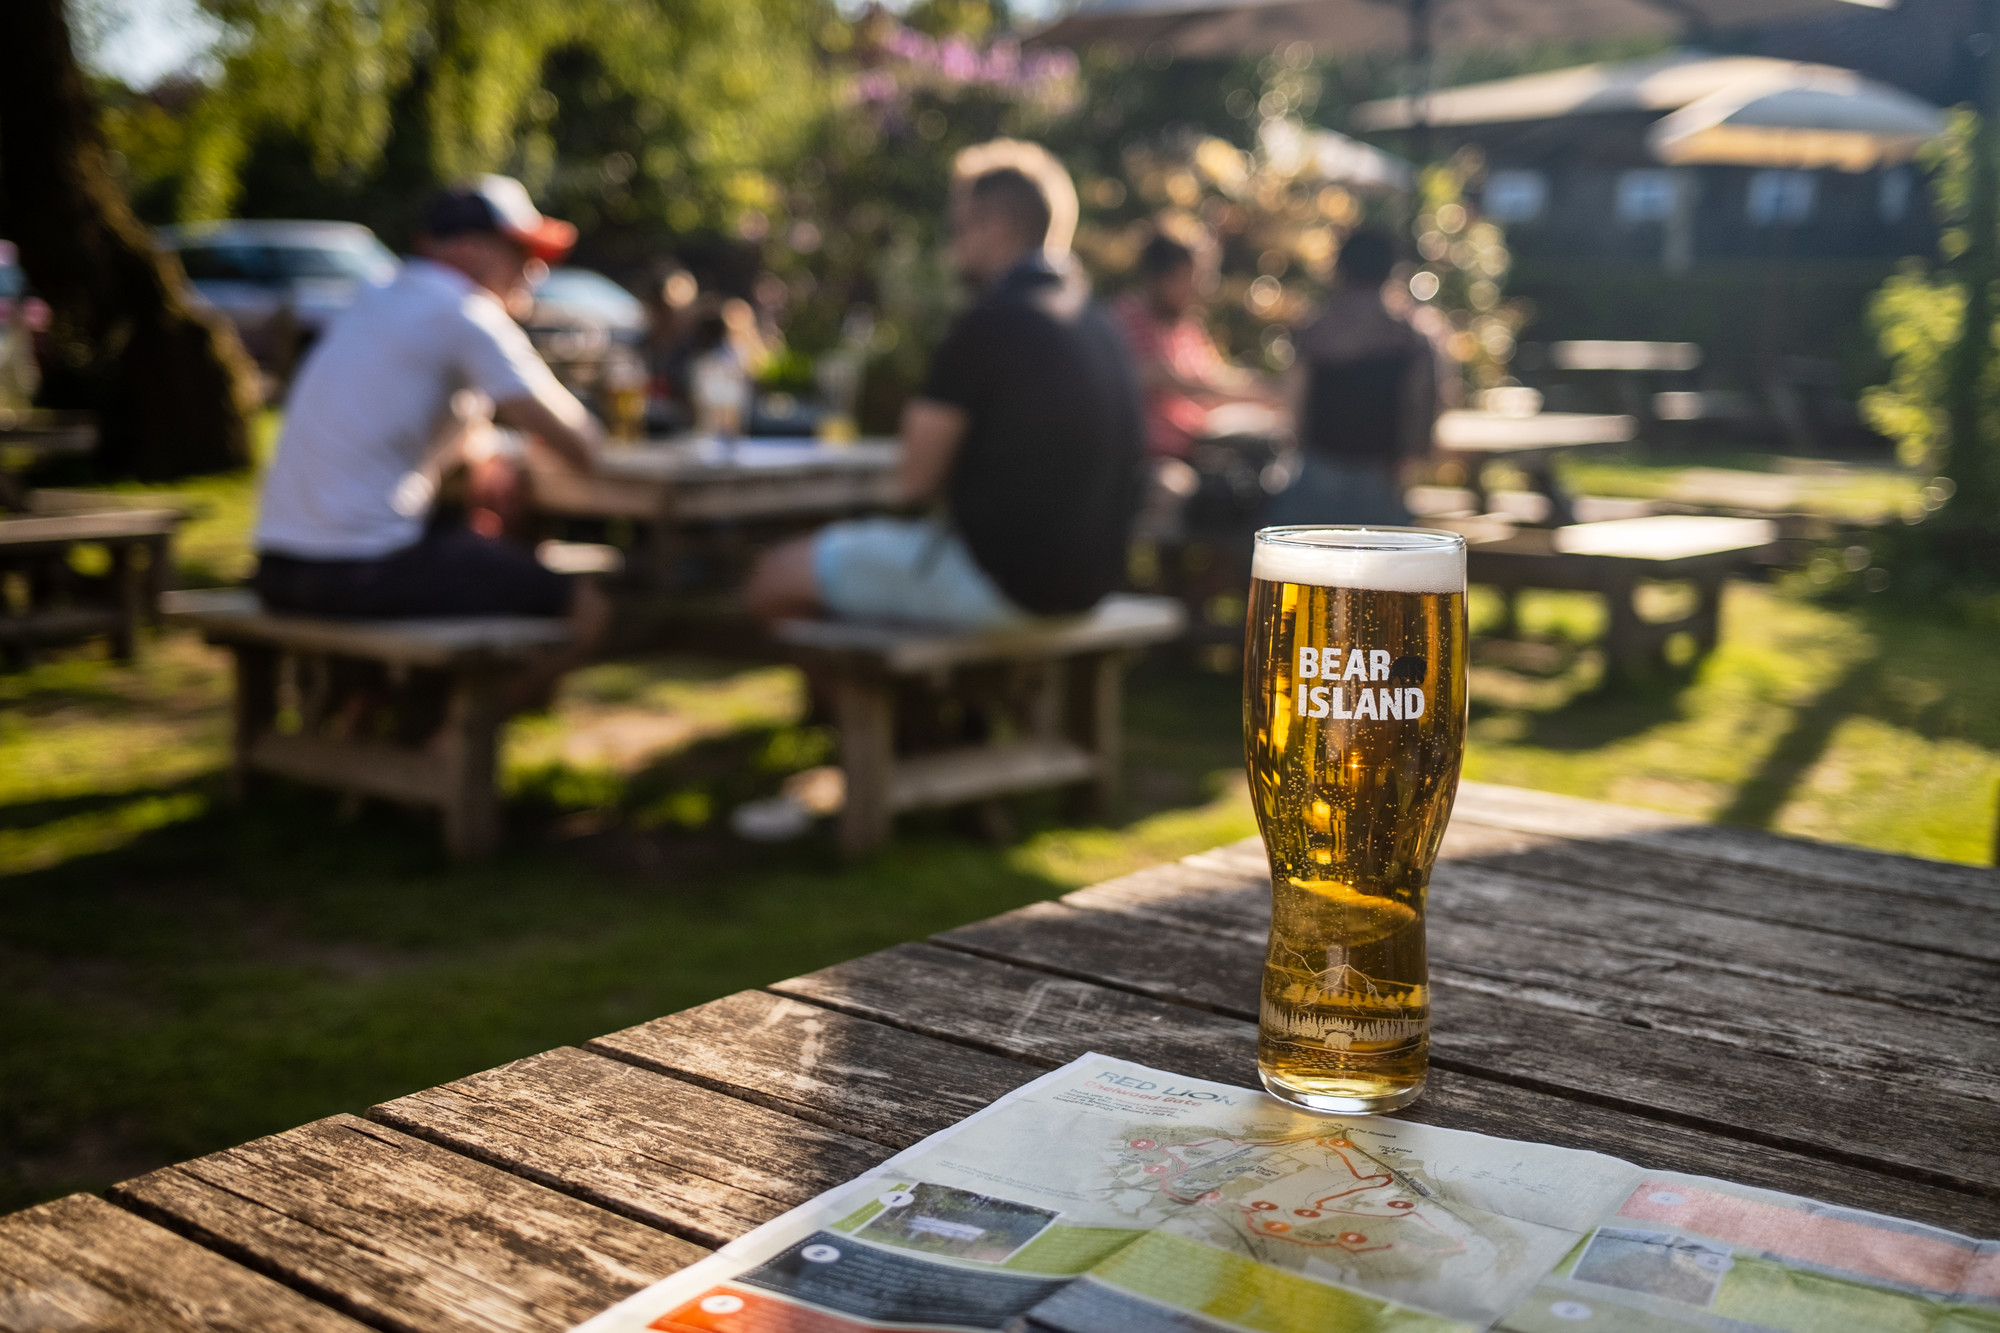 Enjoy a Shepherd Neame pub experience at the end of your walk